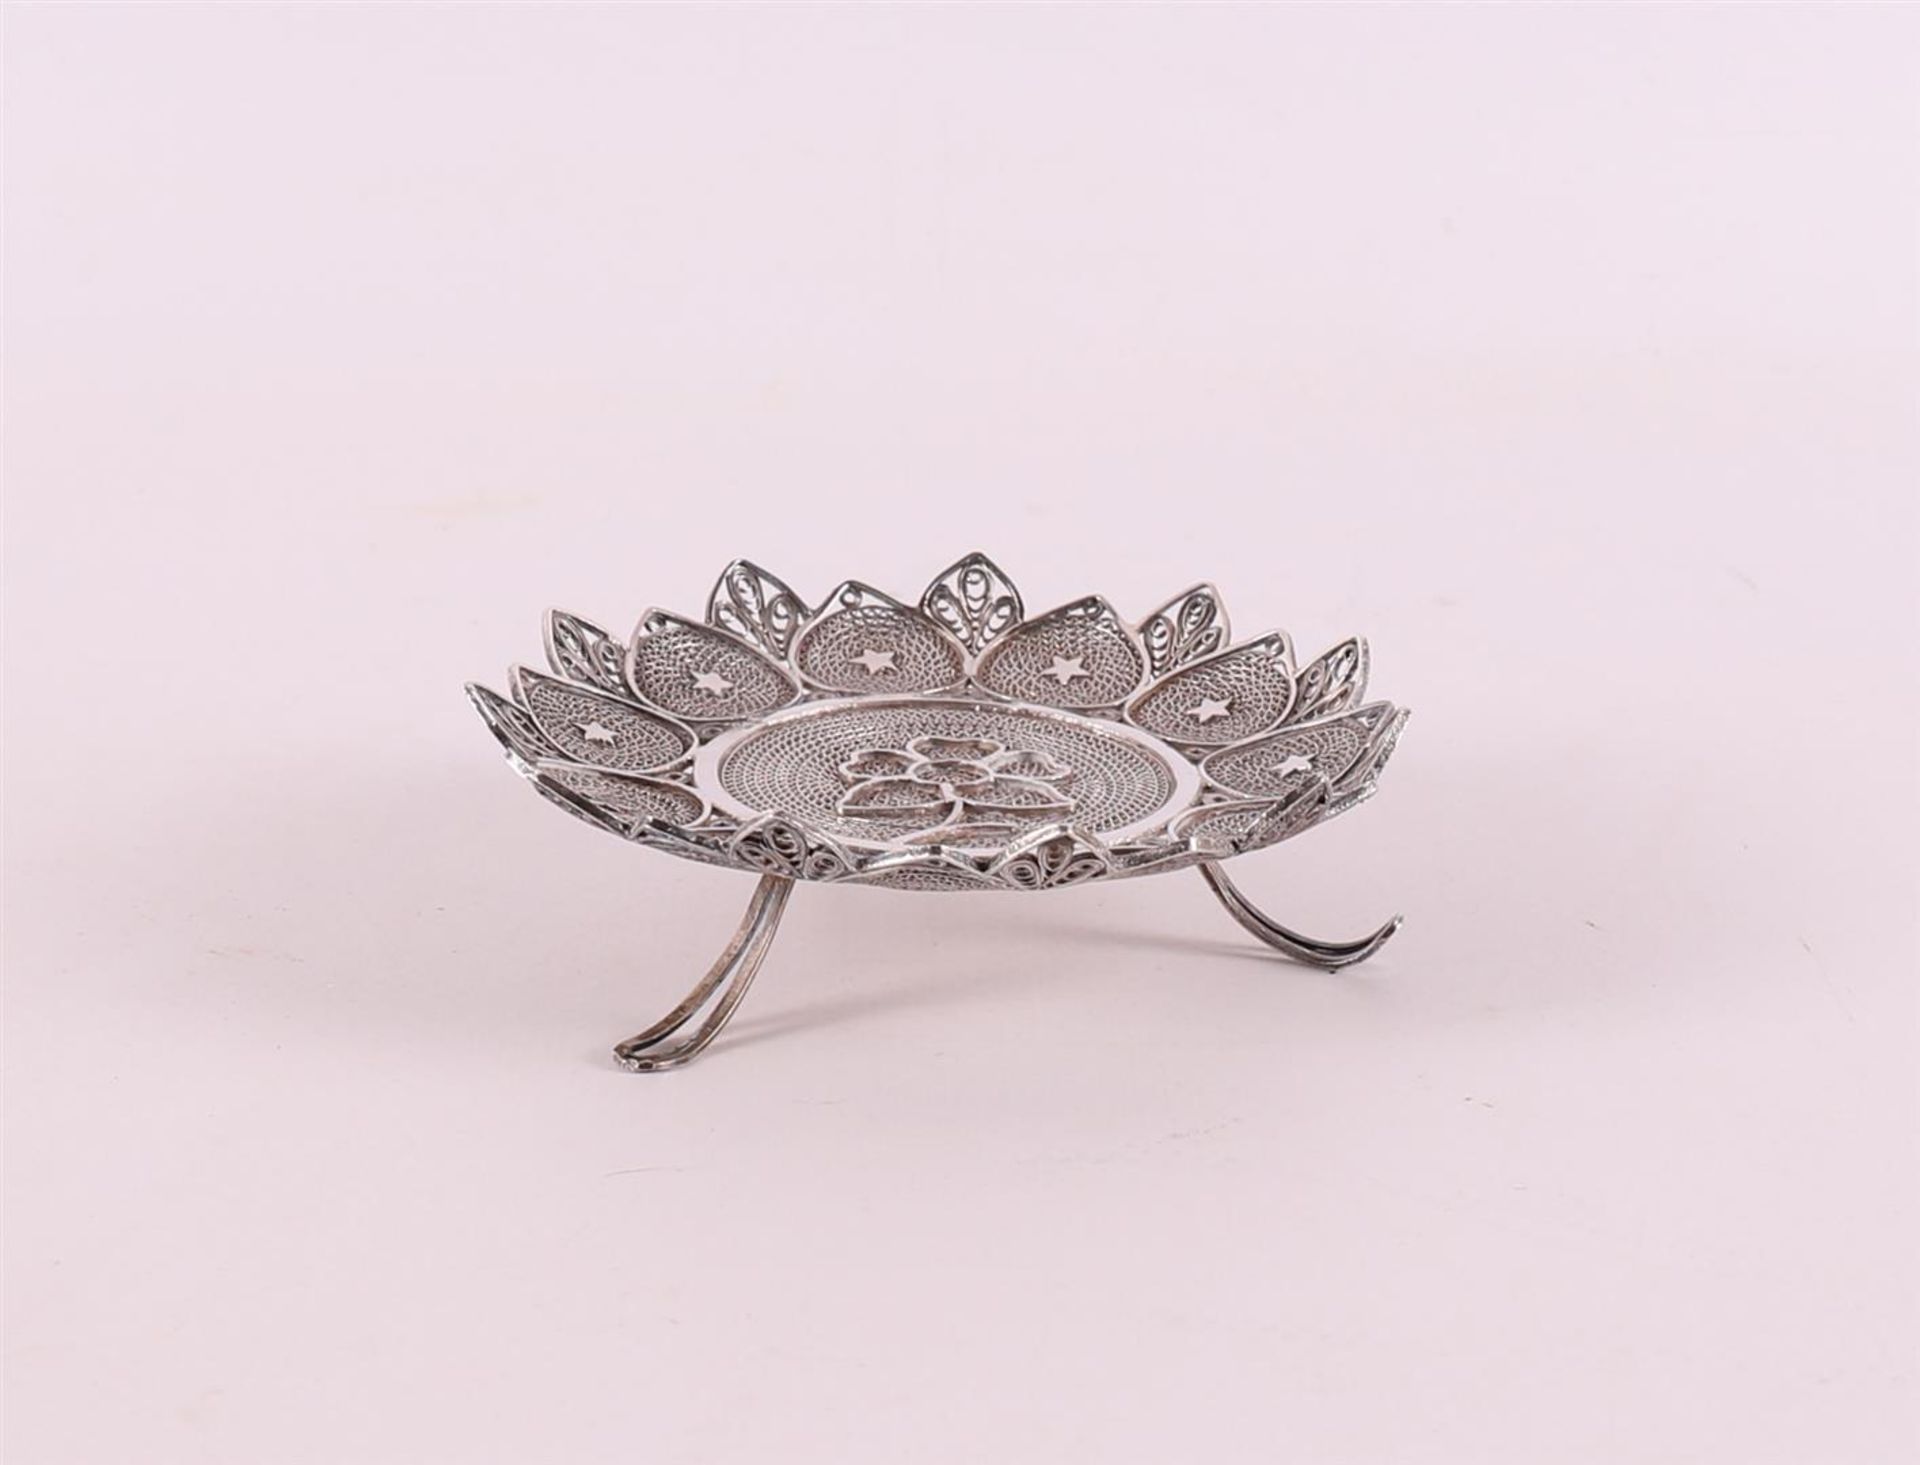 A silver lotus-shaped flirain dish, Indonesia, early 20th century, h 2.7 x Ø 8.7 cm. - Image 2 of 3